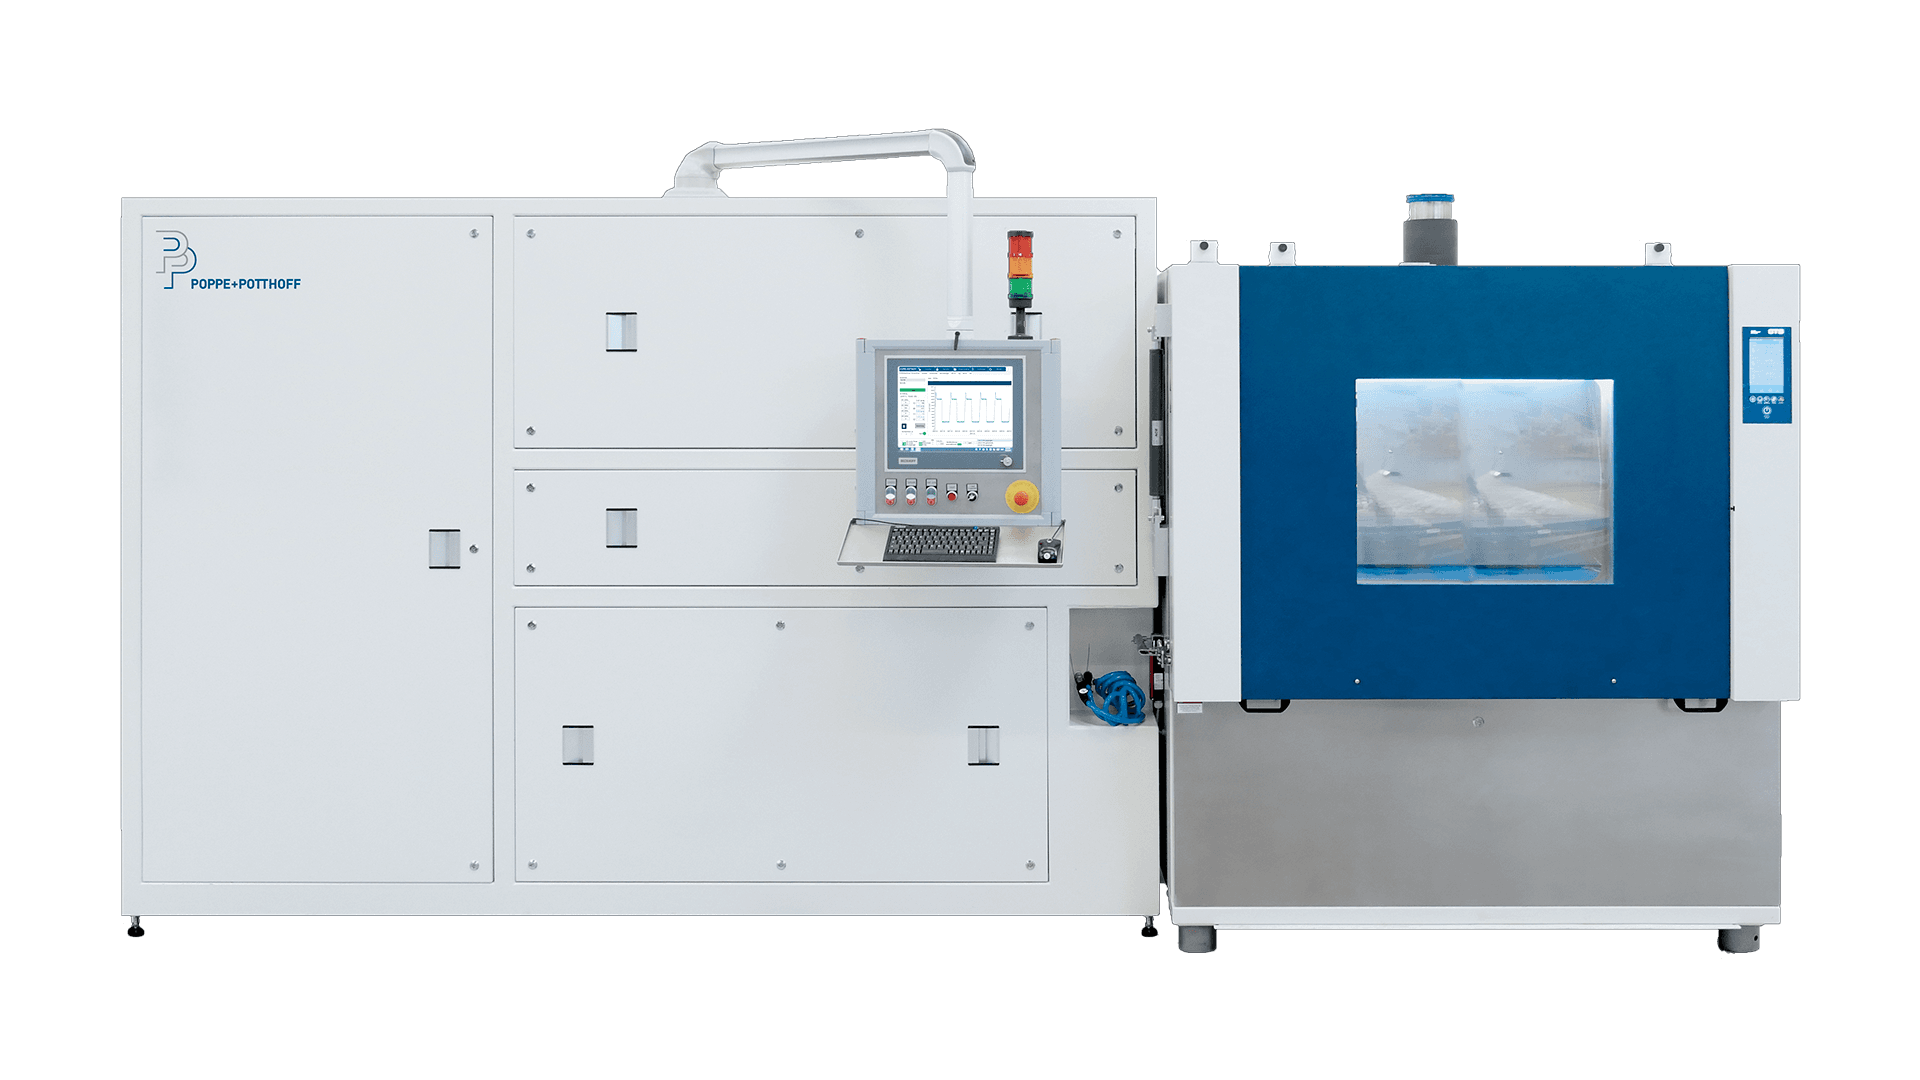 pressure cycle test rig with environmental test chamber by Poppe + Potthoff Maschinenbau